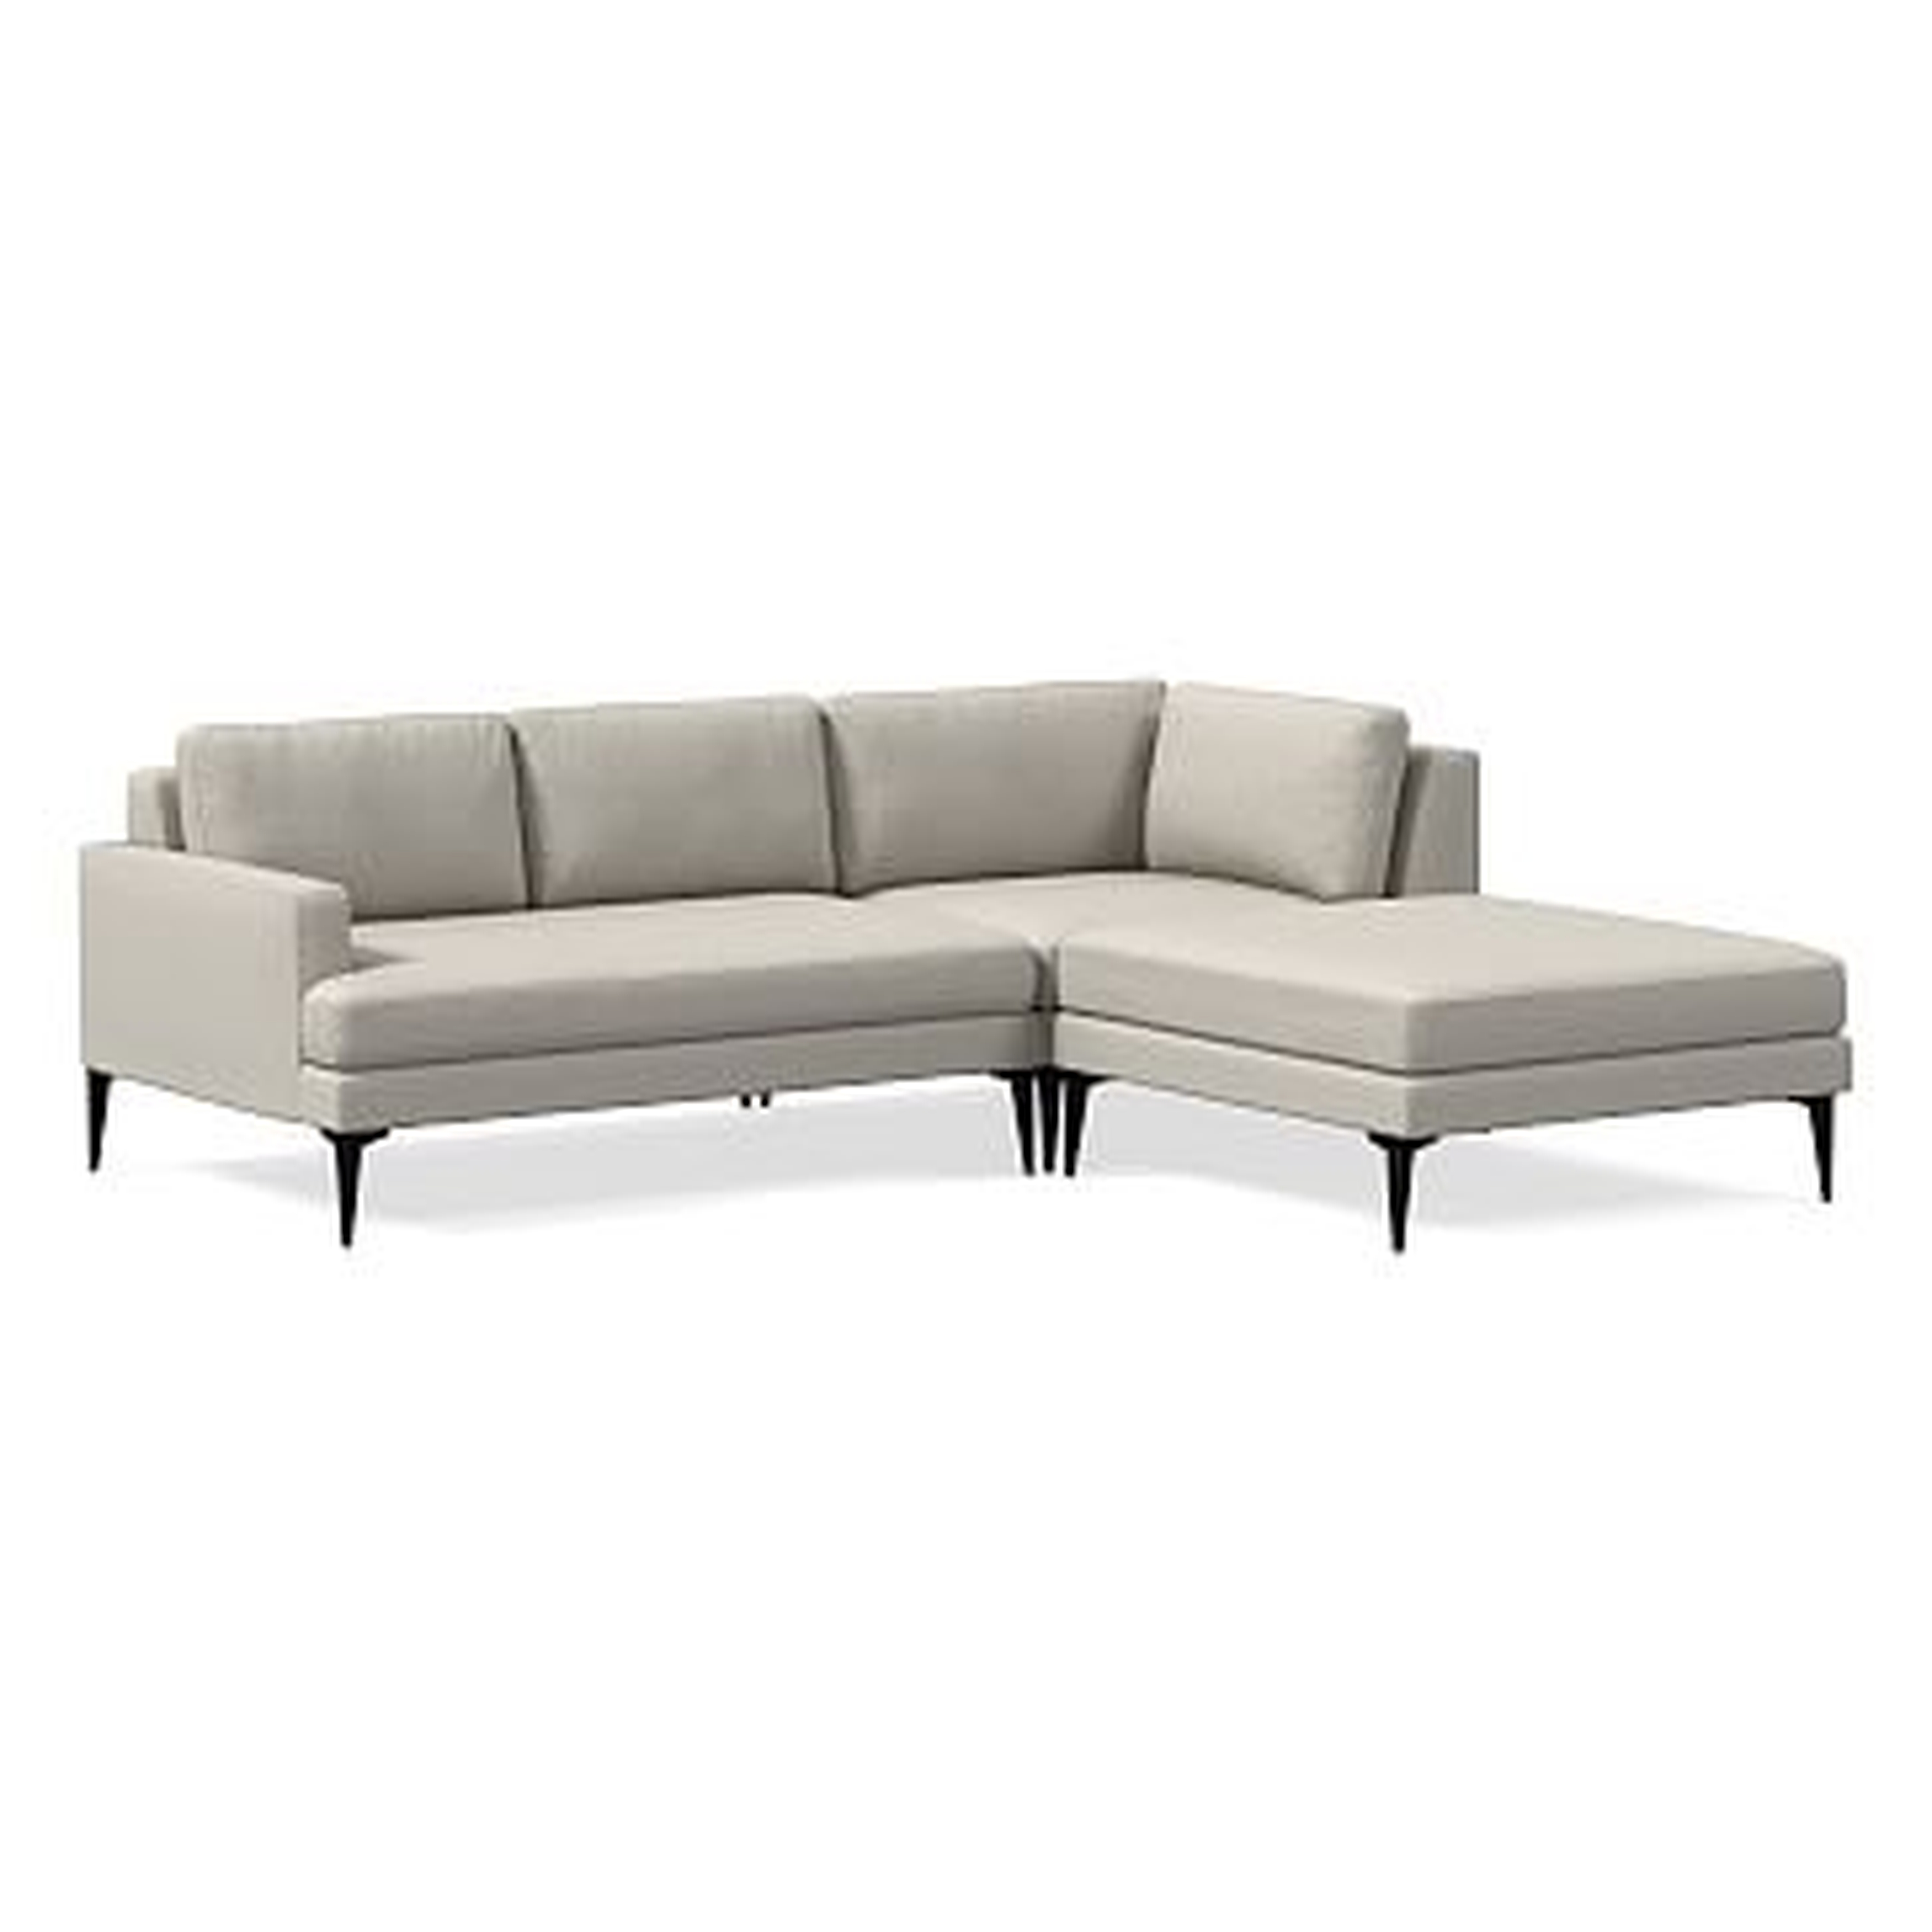 Andes Sectional Set 4: Left Arm 2 Seater Sofa + Ottoman + Corner, Stone, Twill, Dark Pewter - West Elm